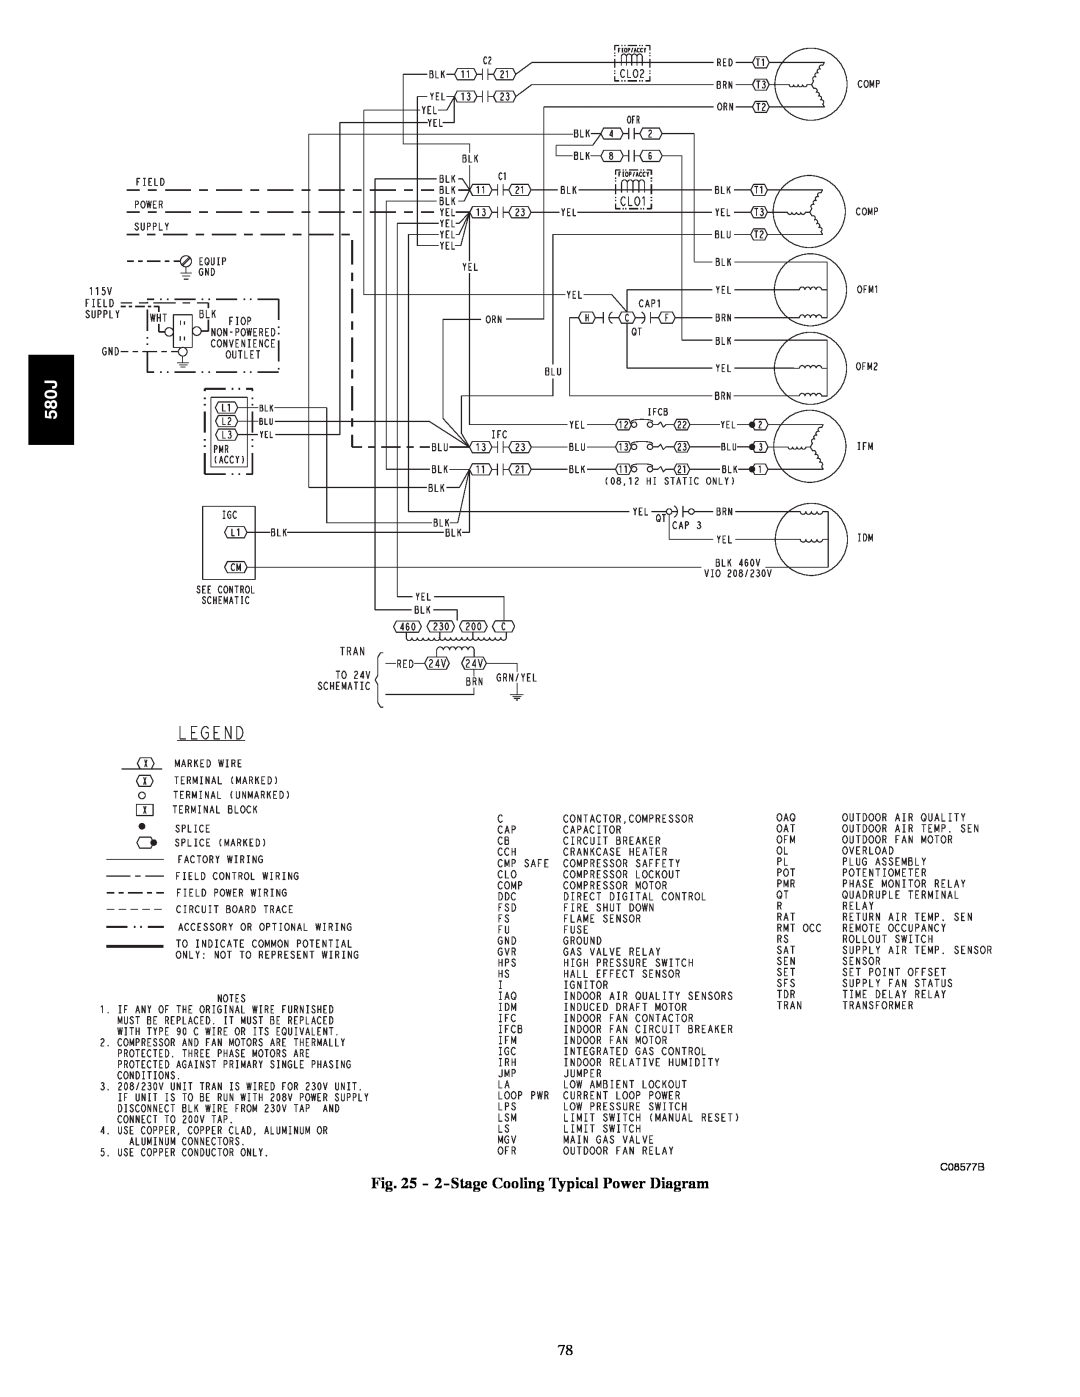 Bryant 580J manual 2-StageCooling Typical Power Diagram, C08577B 